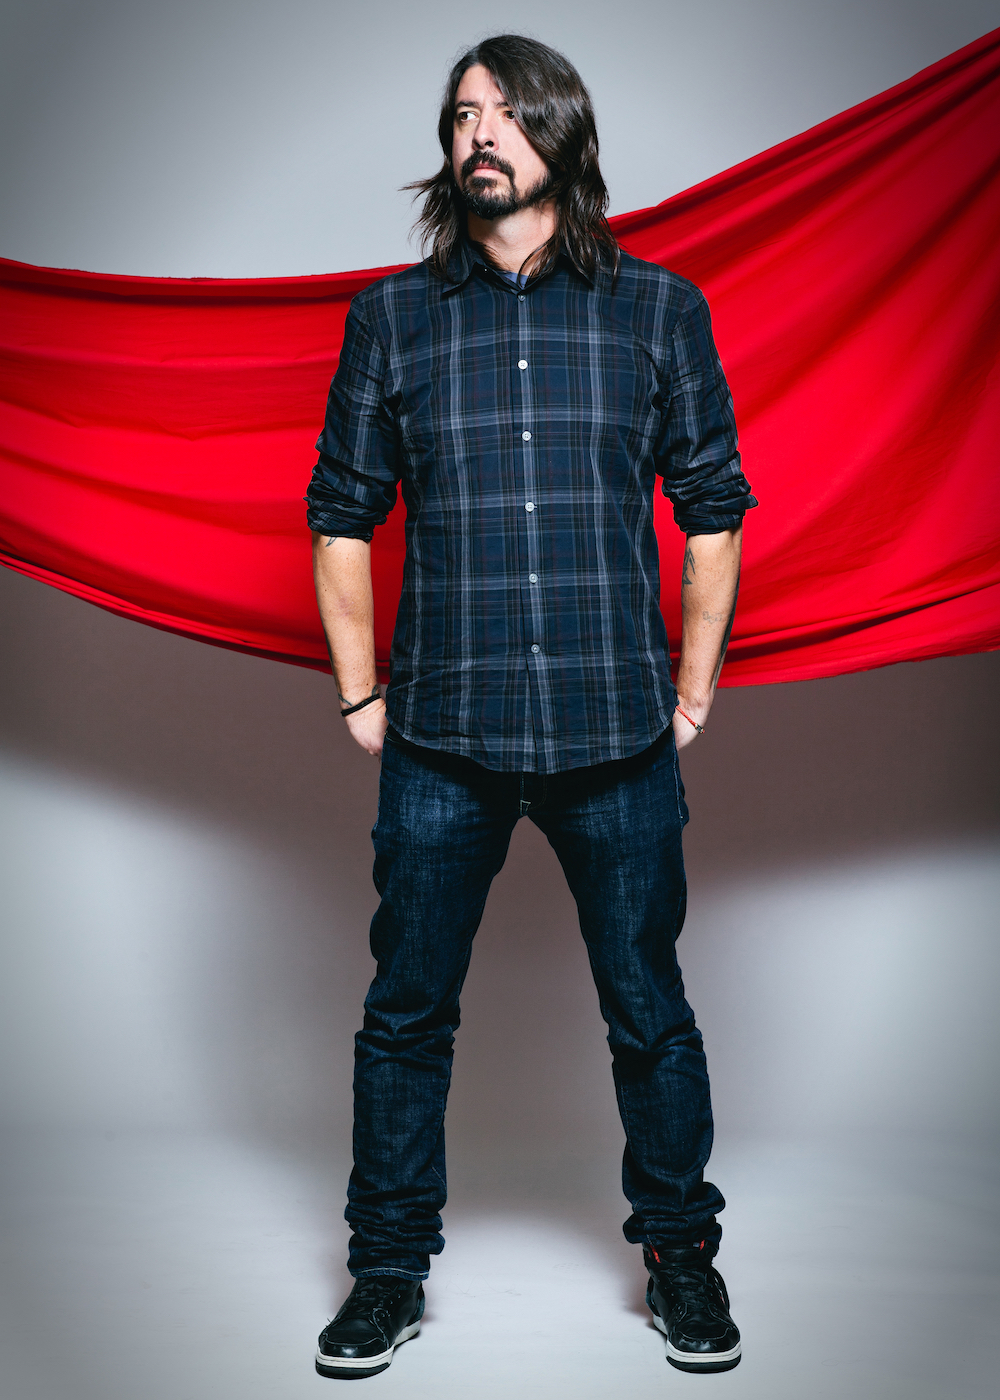 Dave Grohl for Rolling Stone magazine. © Danny North